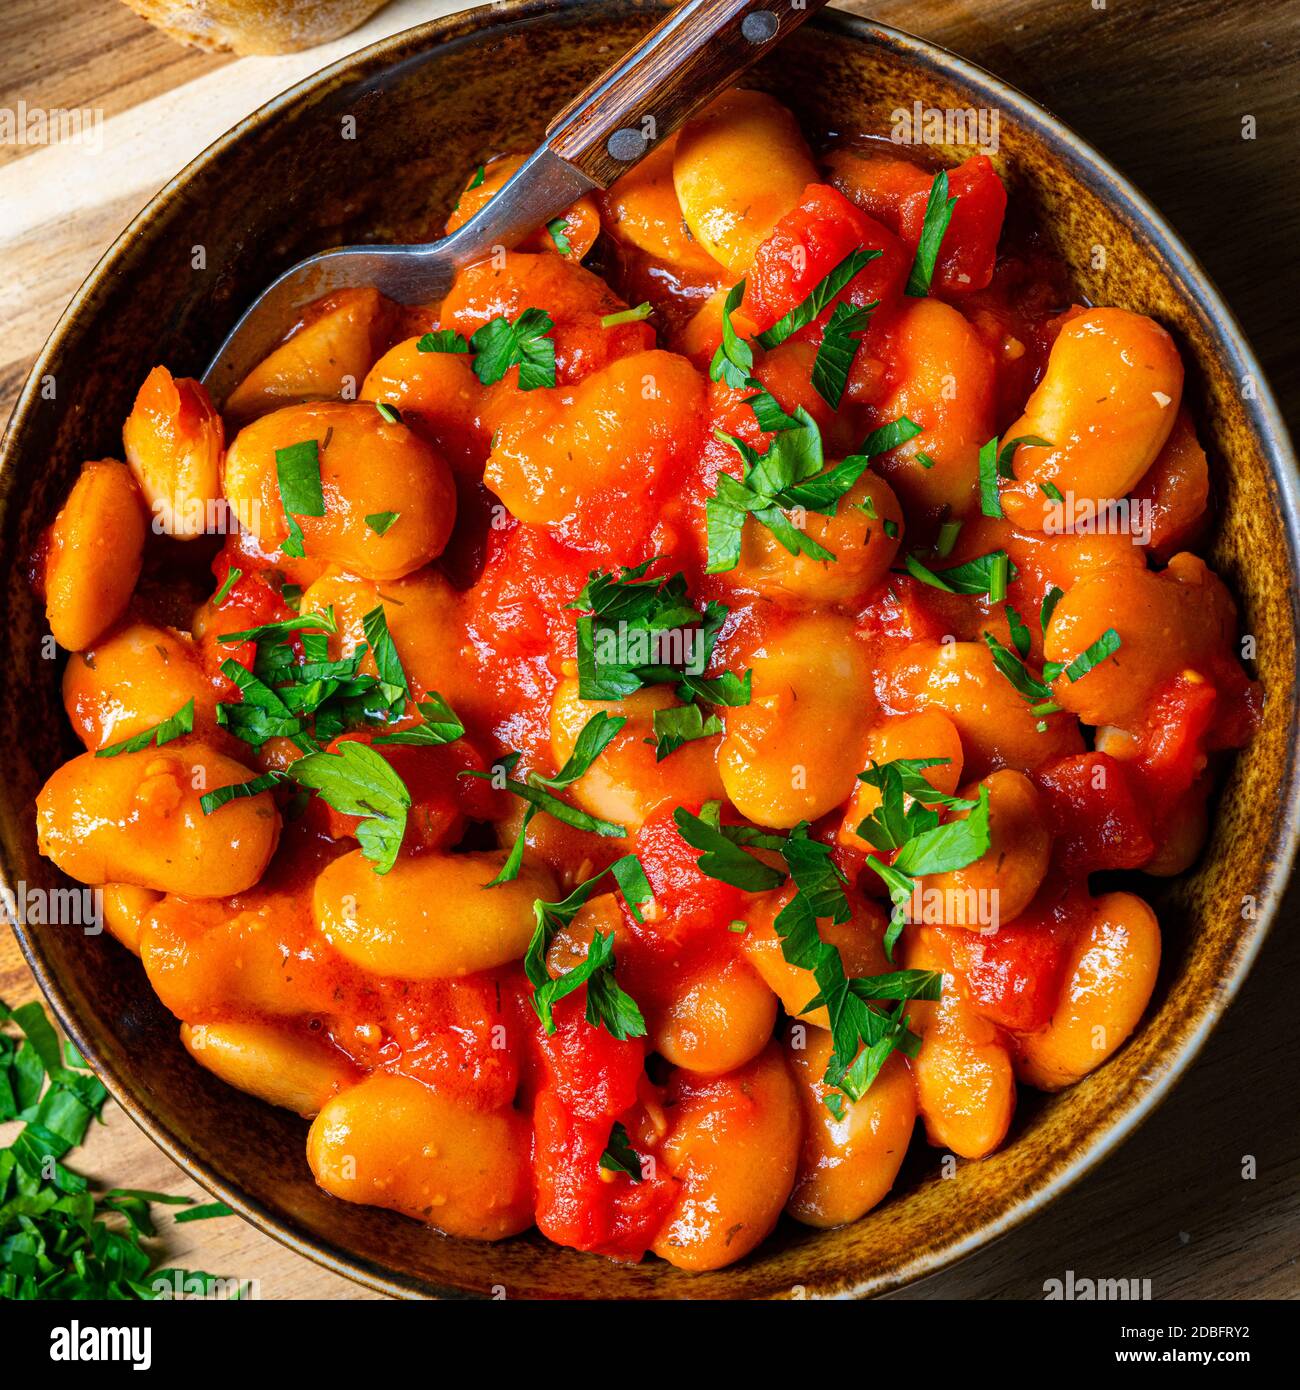 Rustic giant beans with fresh tomato sauce Stock Photo